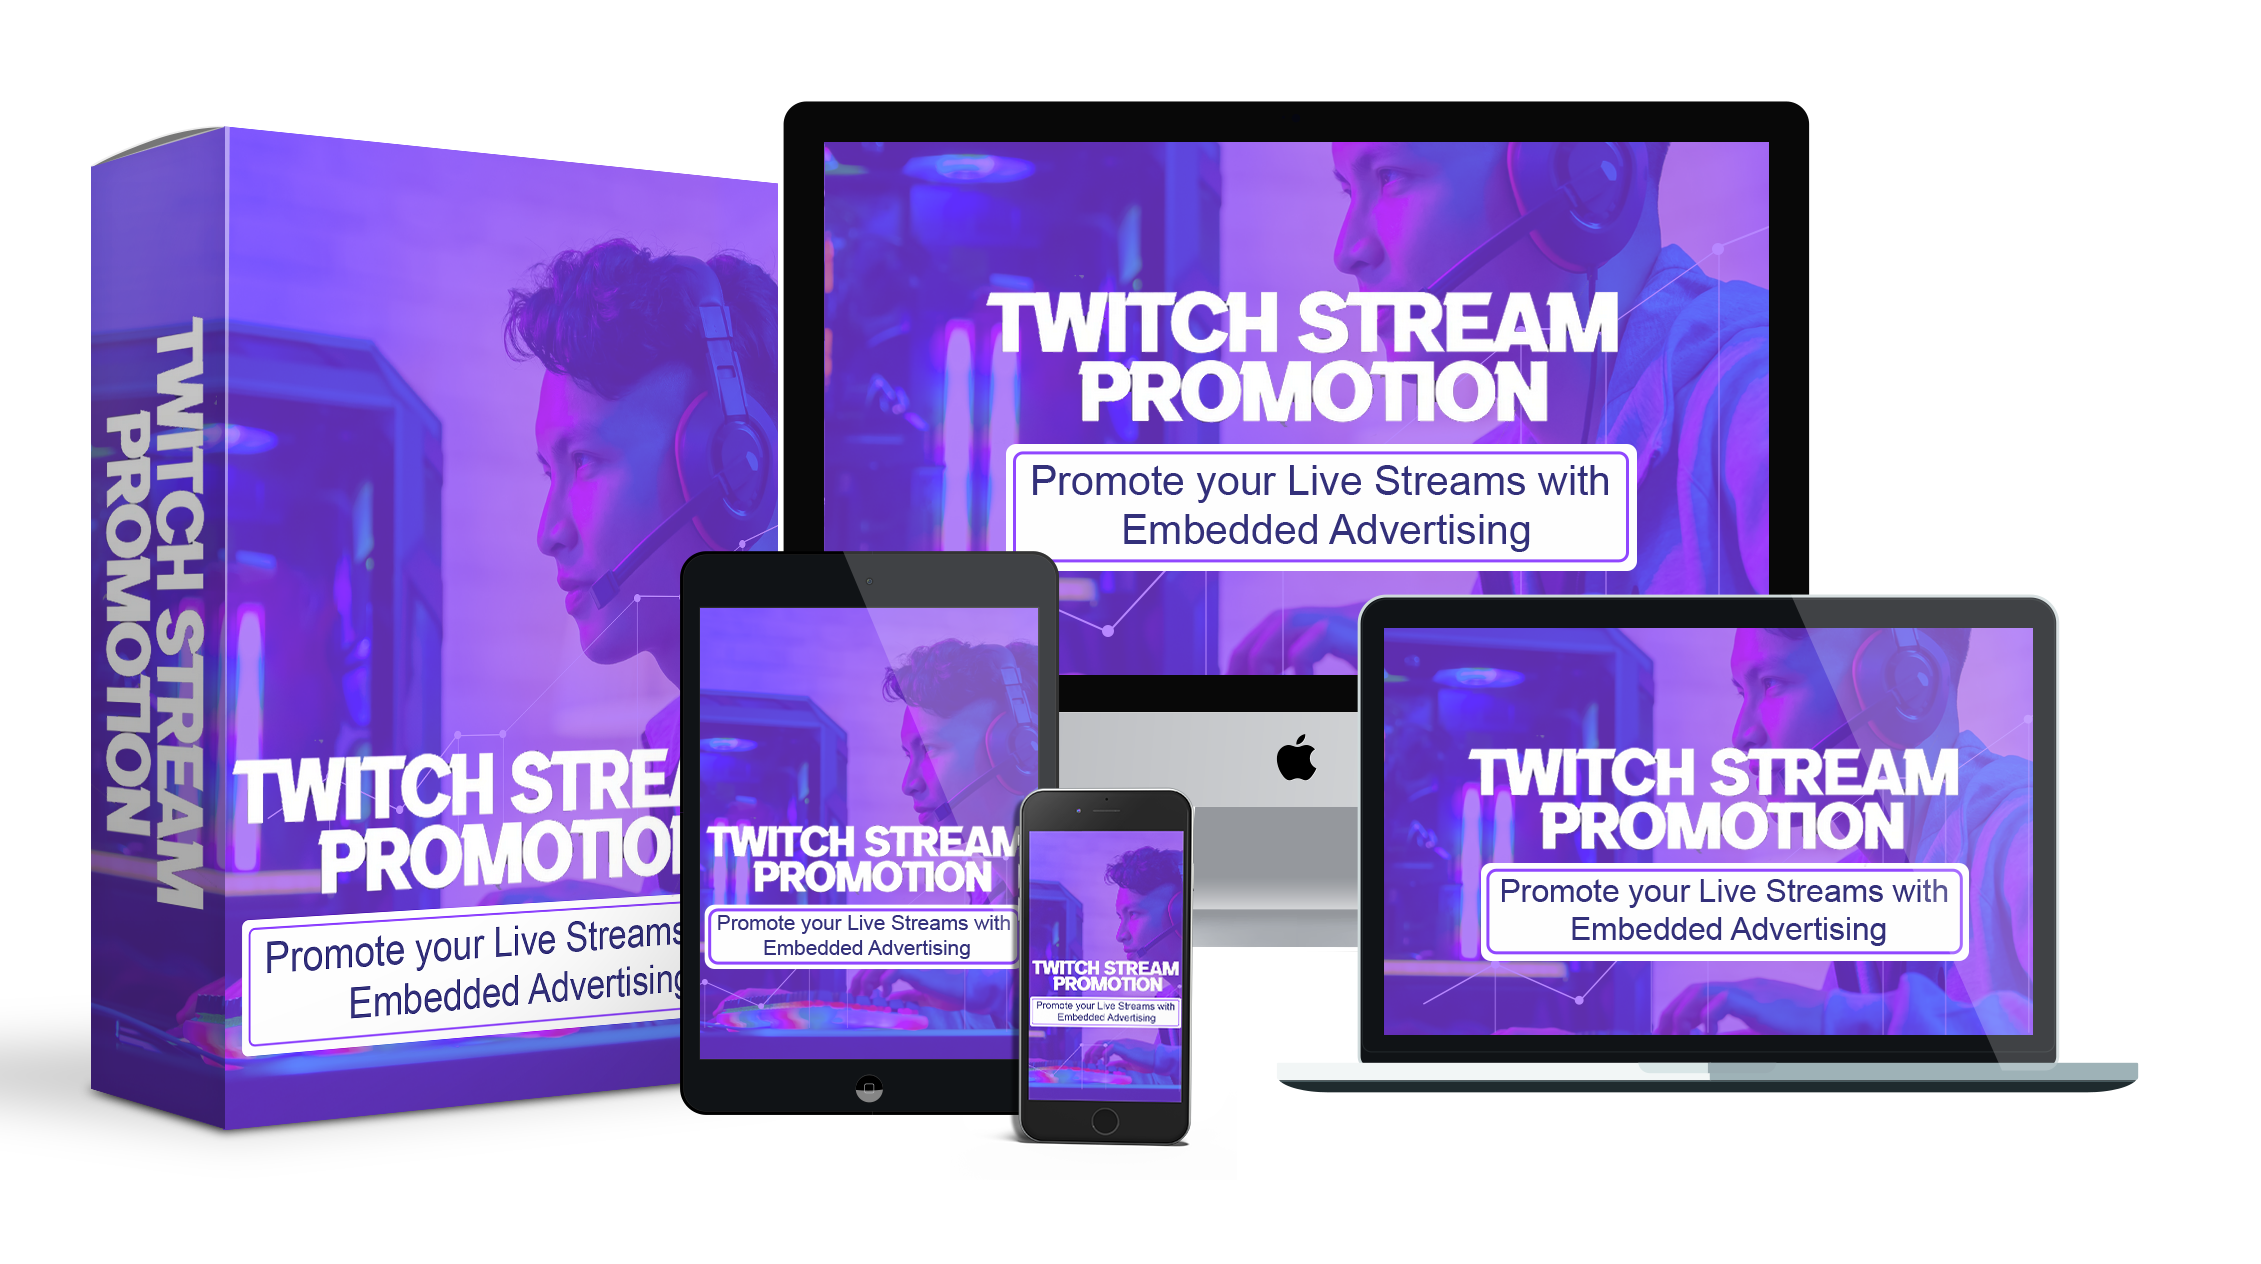 UNLIMITED Twitch Stream Promotion - Embedding - One Month (Recurring)